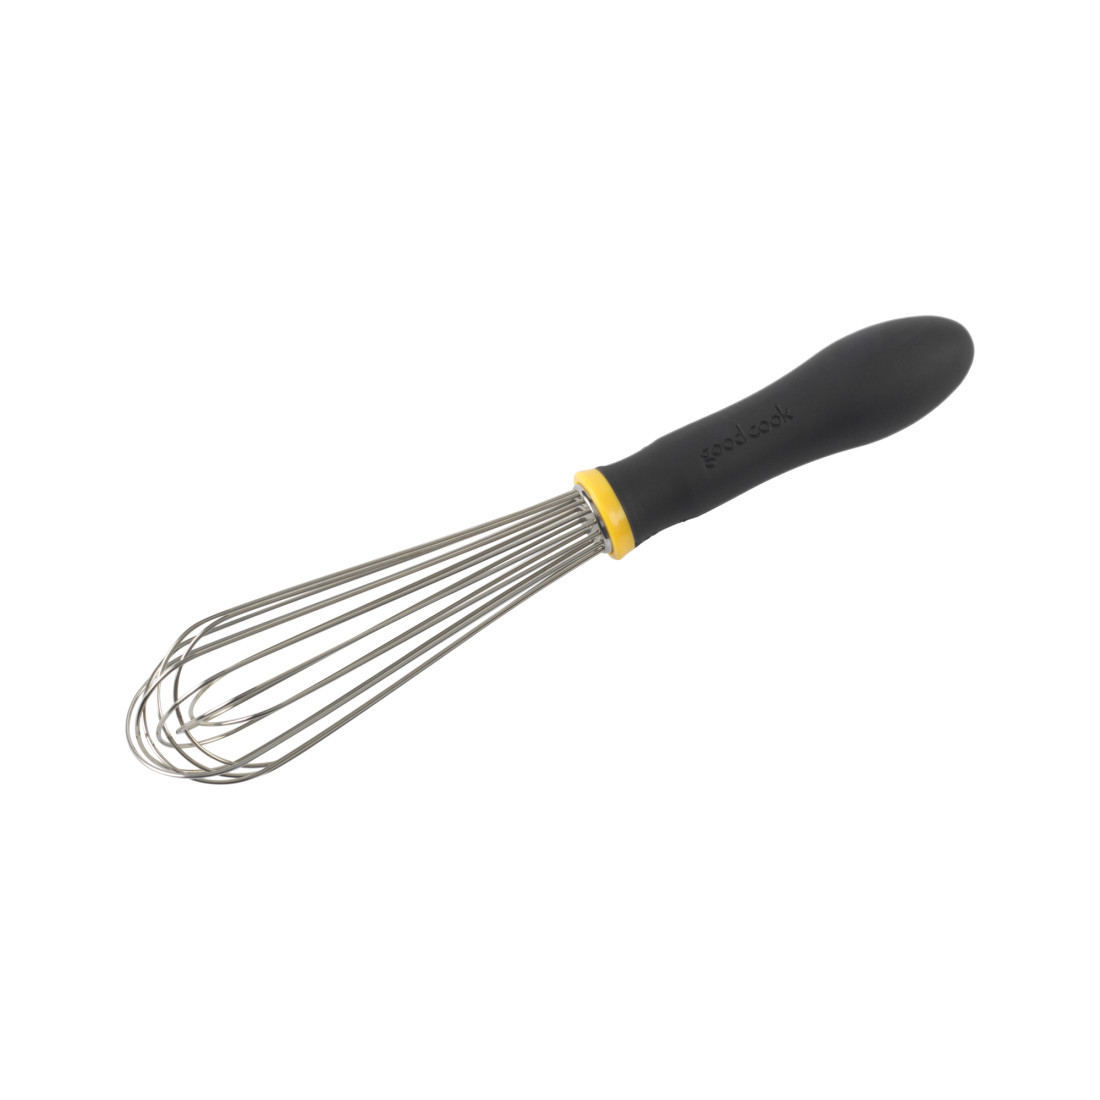 OXO Stainless Steel Heavy 9-Inch Whisk with Stainless Steel Handle NEW